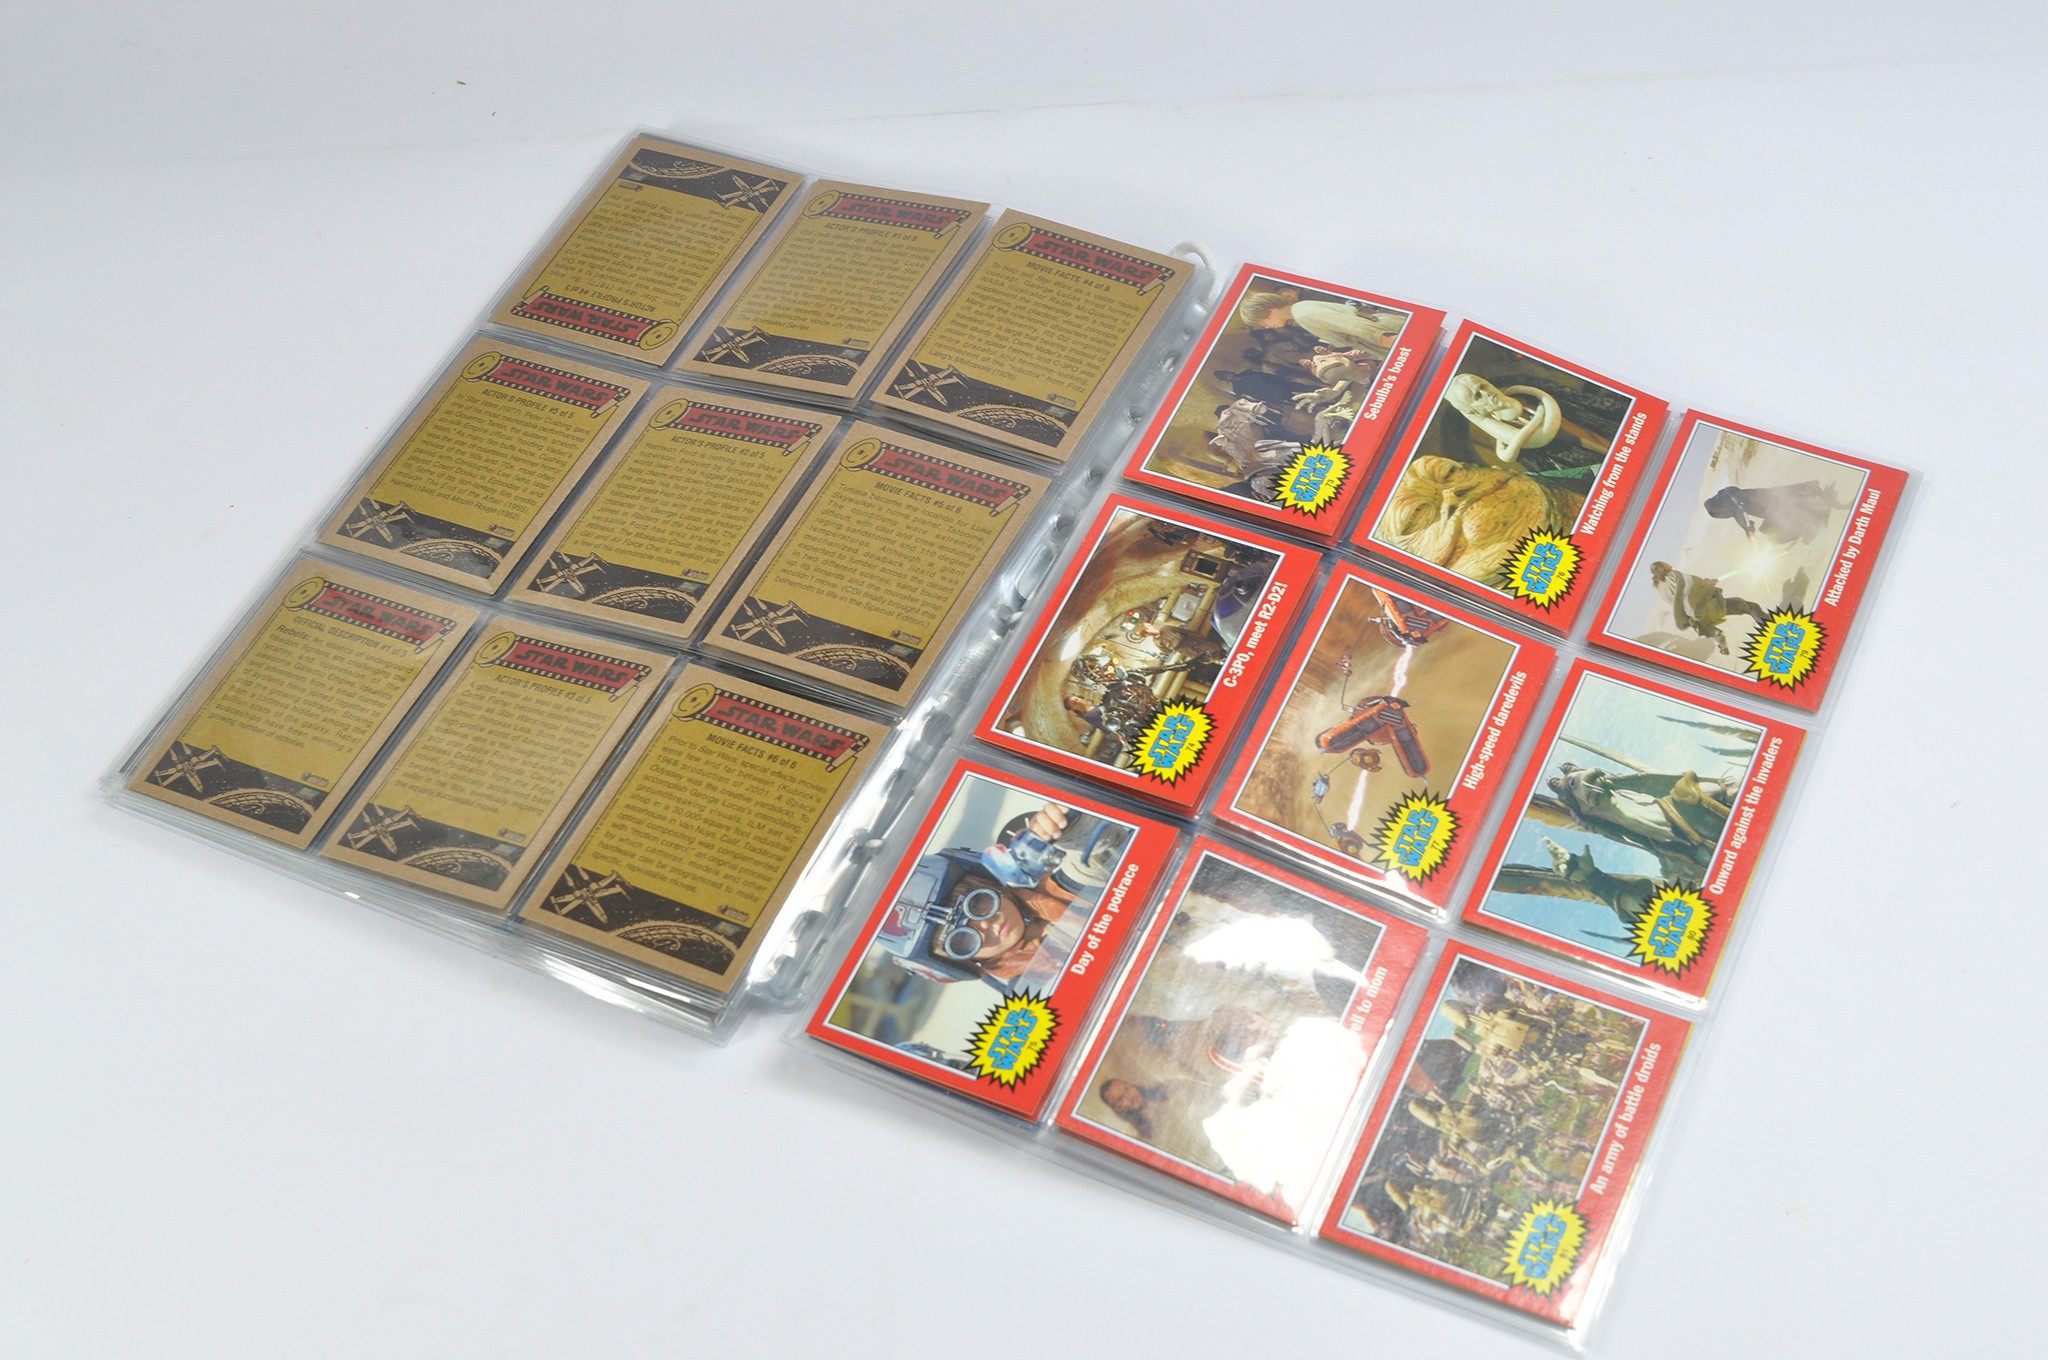 Star Wars Original Topps Trading Cards comprising a quantity of 117 issues from various series. - Image 3 of 3